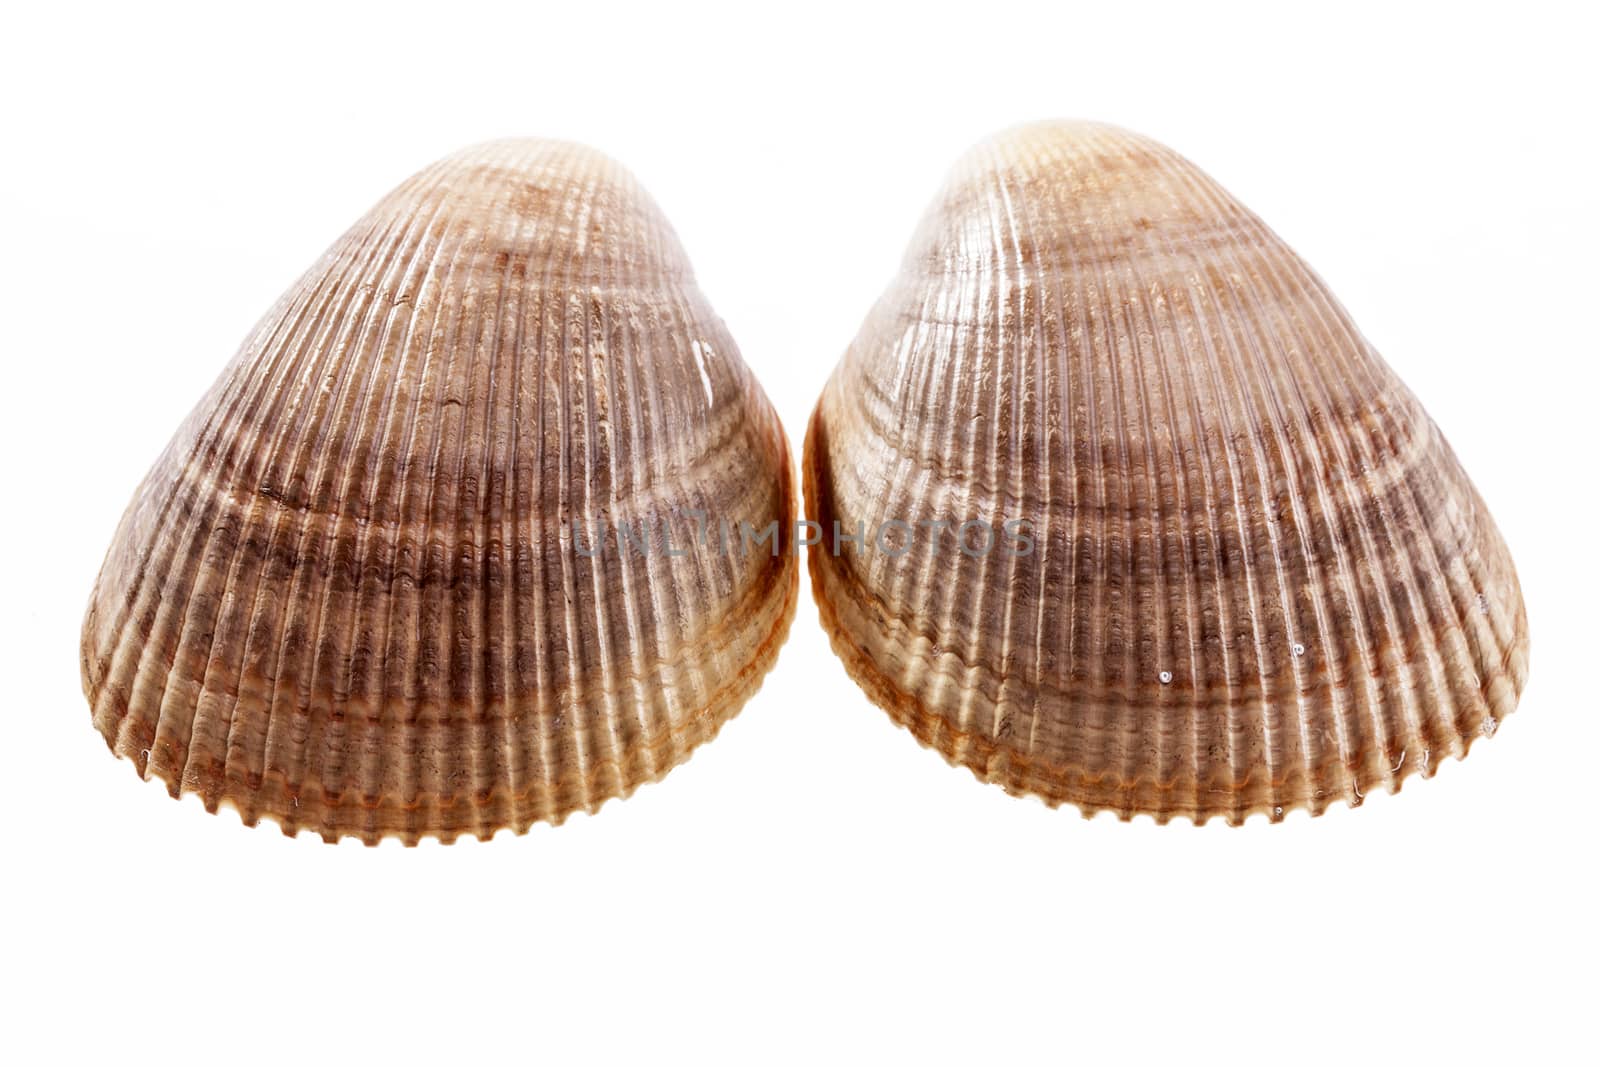 Two sea shells of  mollusk isolated on white background. by mychadre77